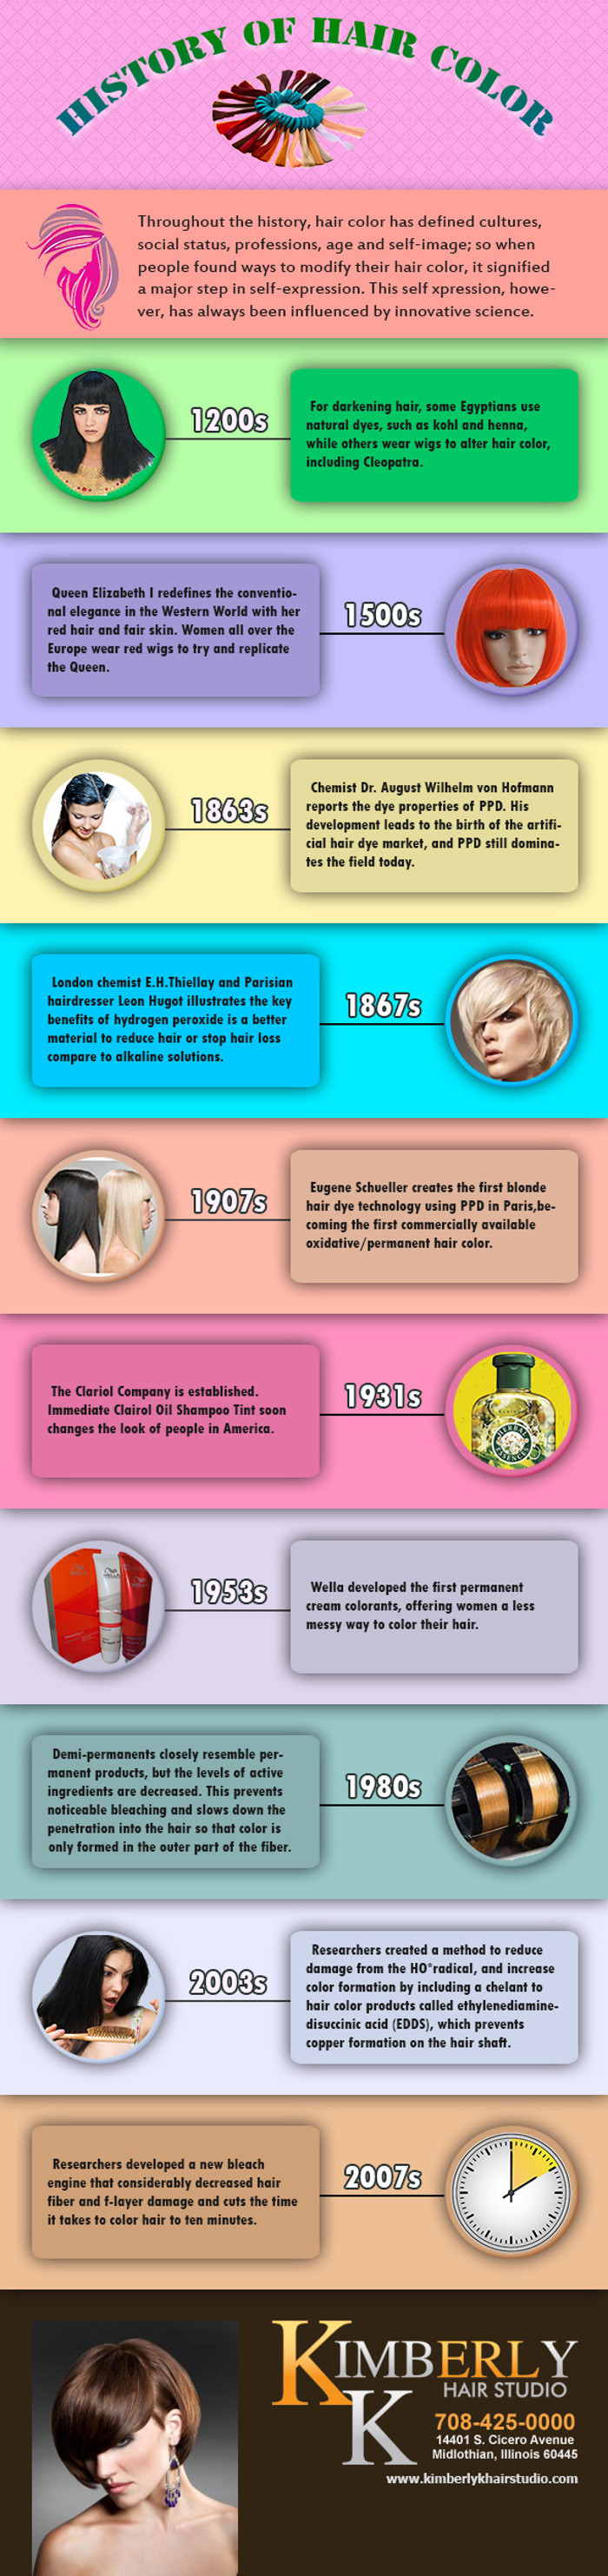 History of Hair Color